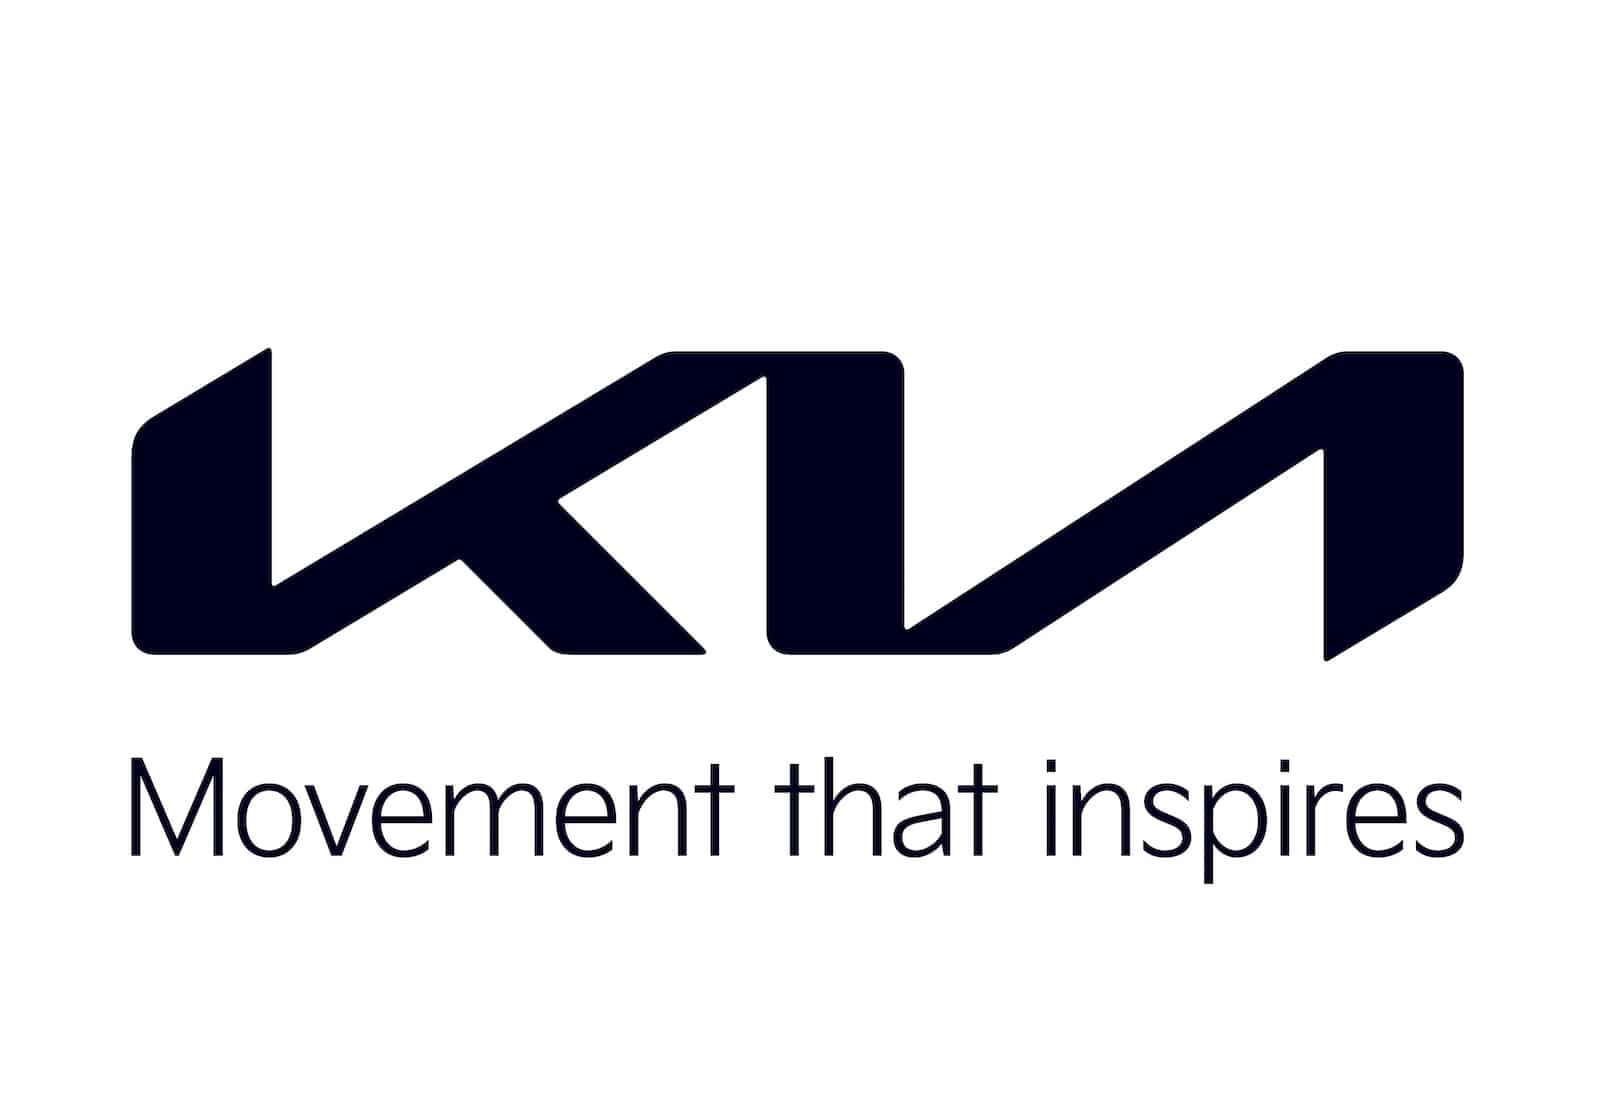 Kia Unveils New Logo Design that Reflects Focus on Mobility The